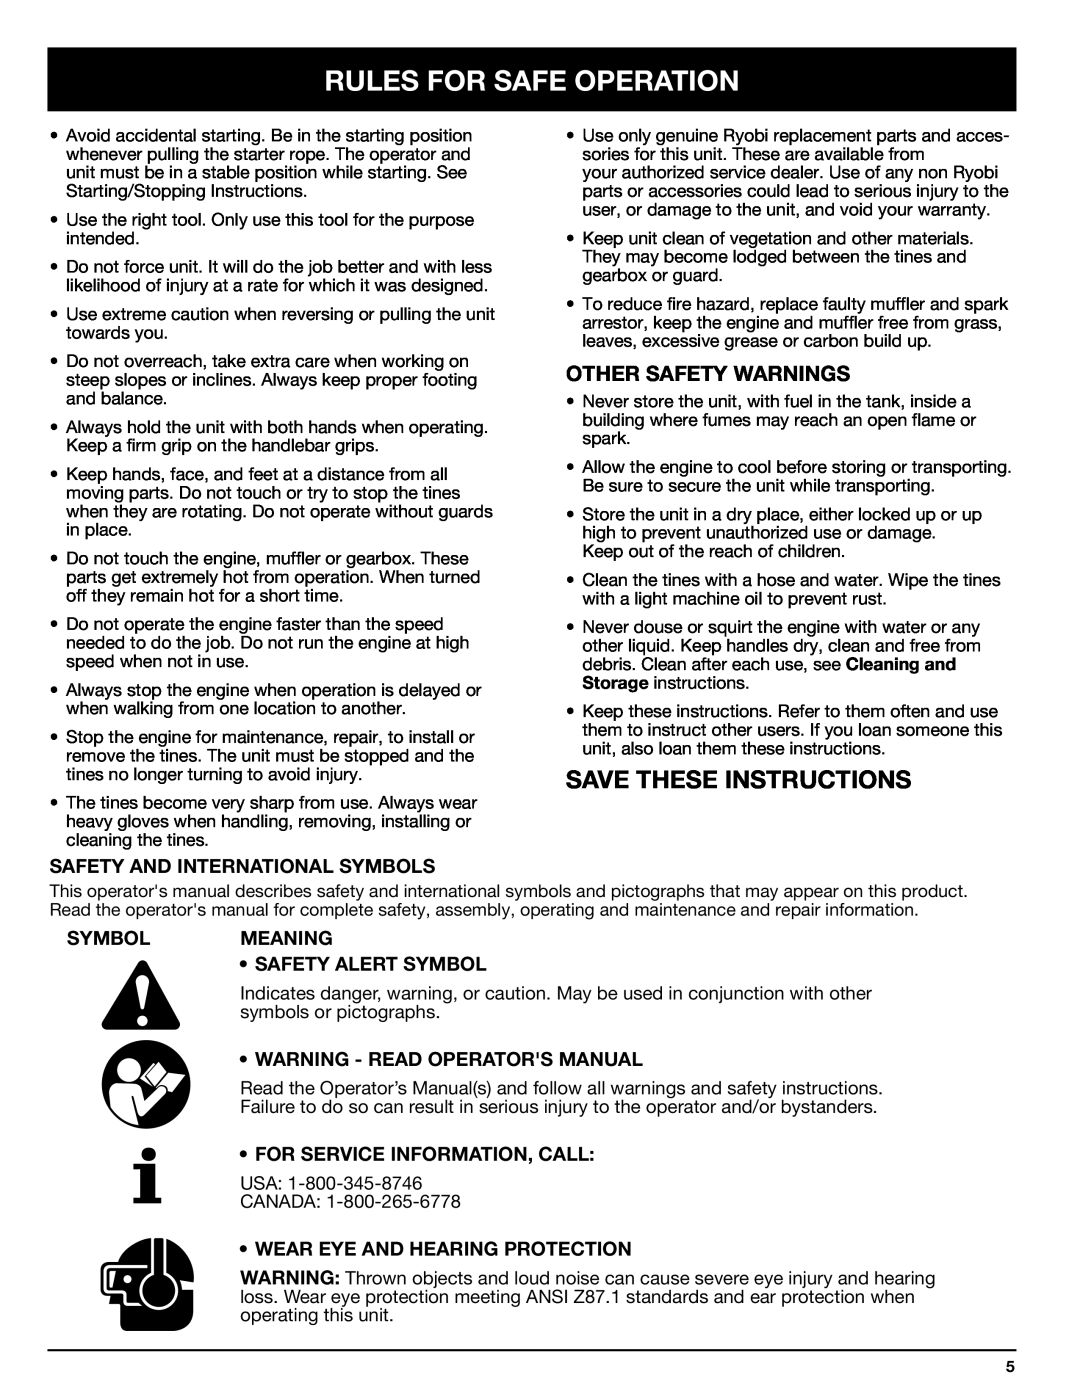 Ryobi Outdoor 510r manual Save These Instructions, Other Safety Warnings, Safety And International Symbols 